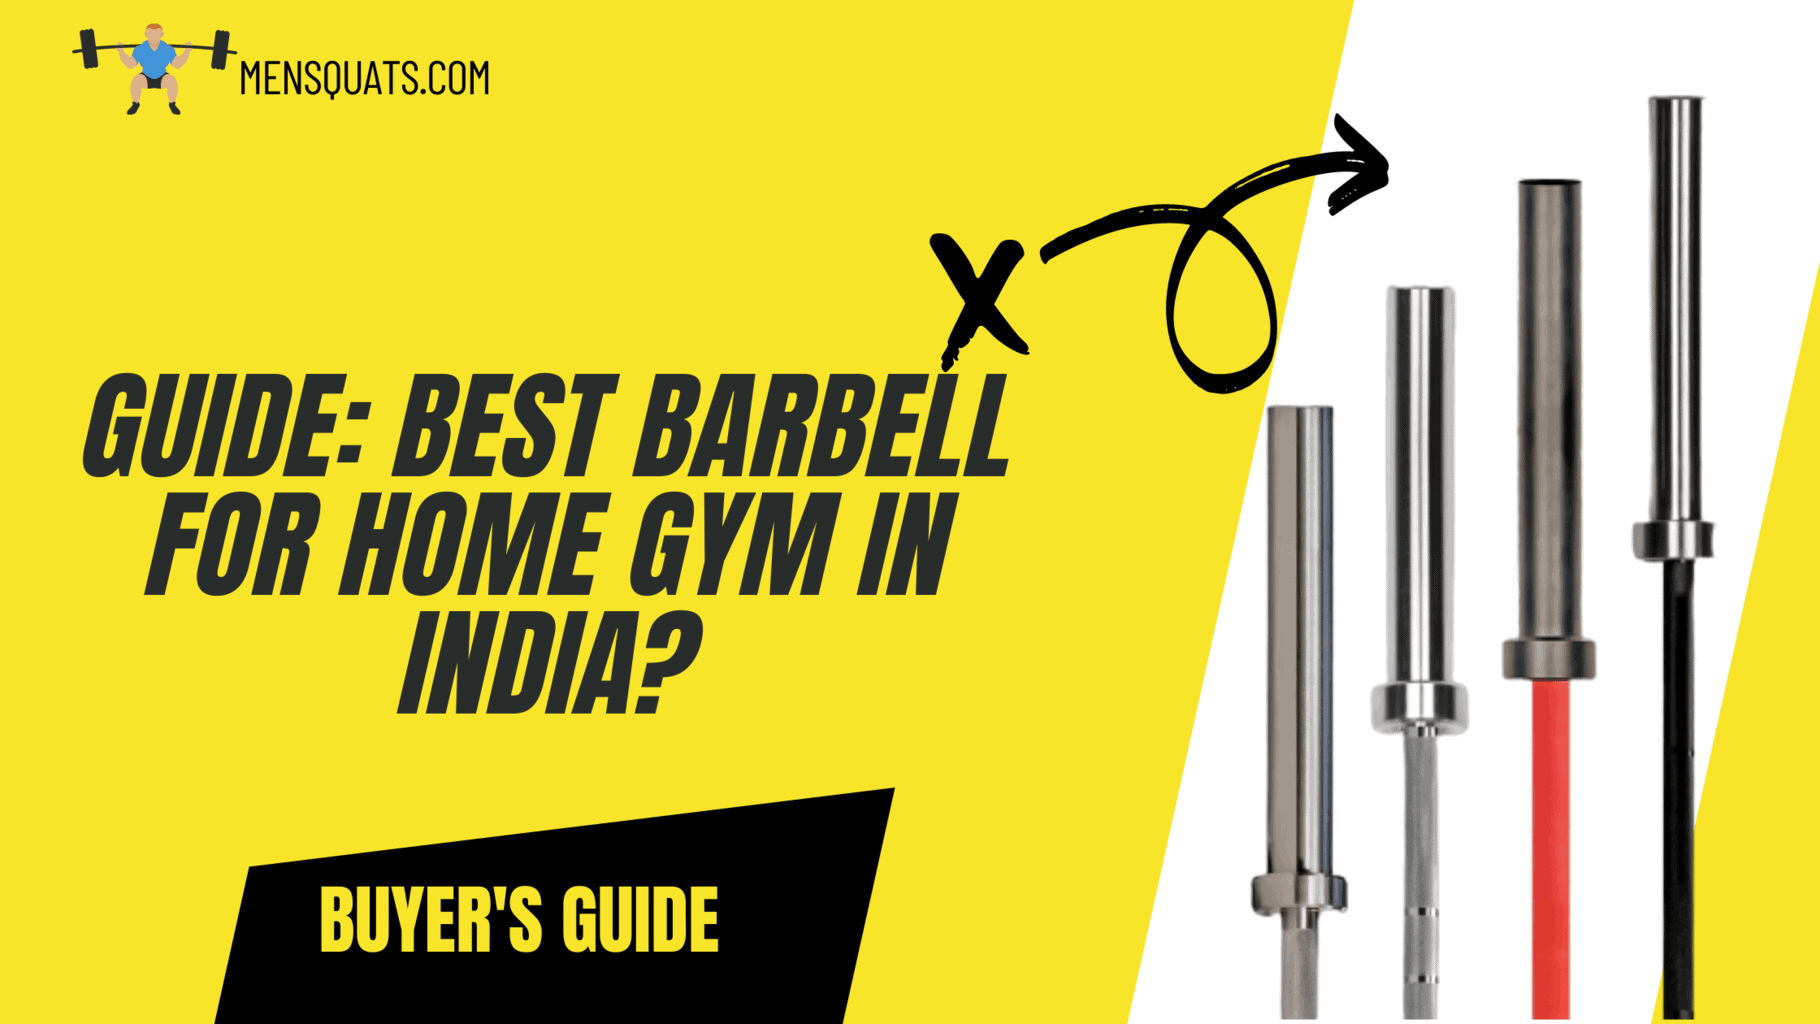 Best barbell for home gym india